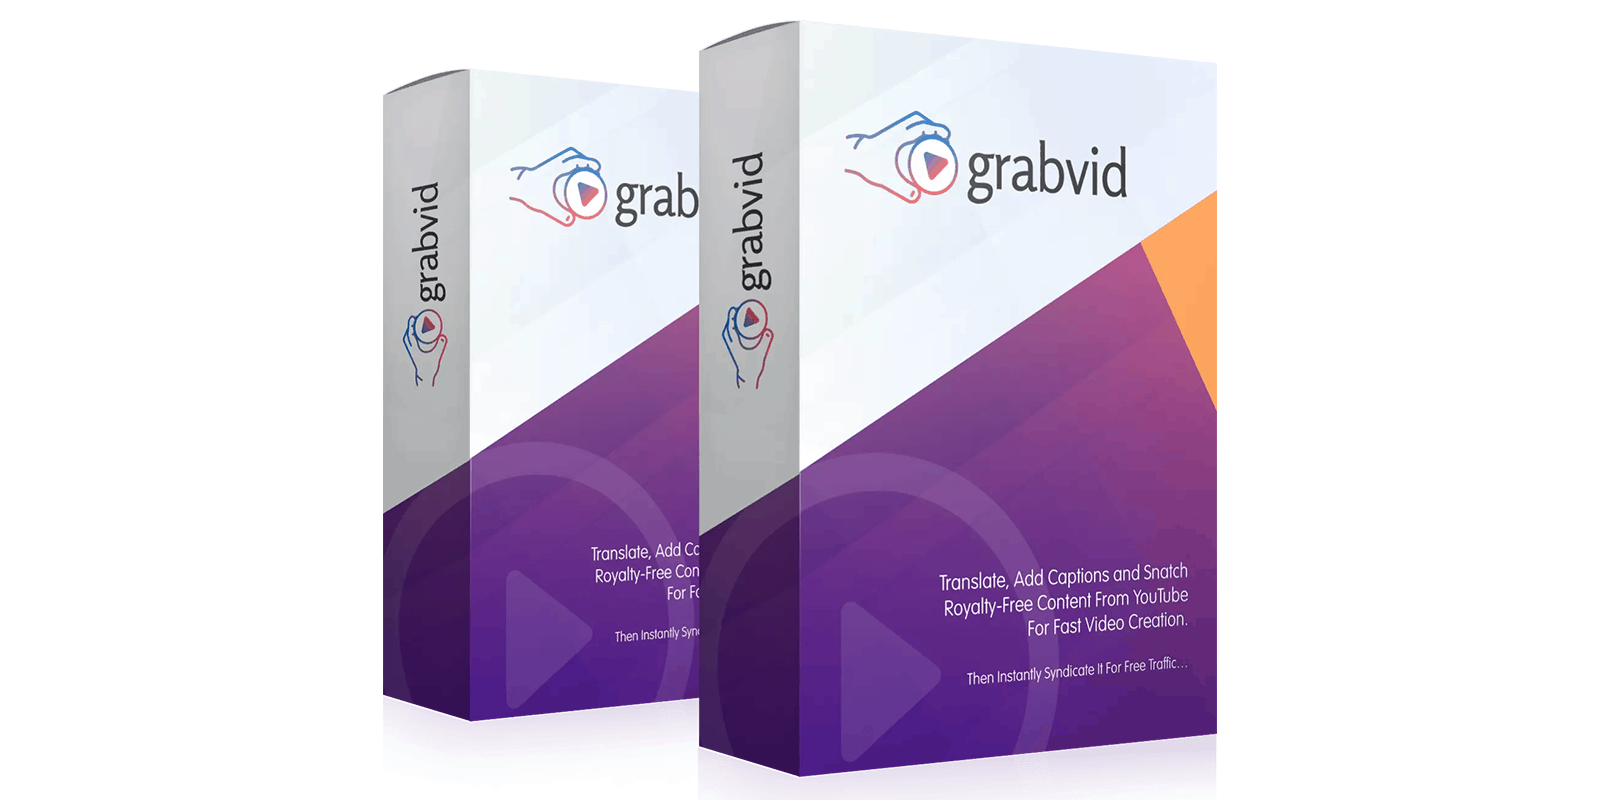 Grabvid Review